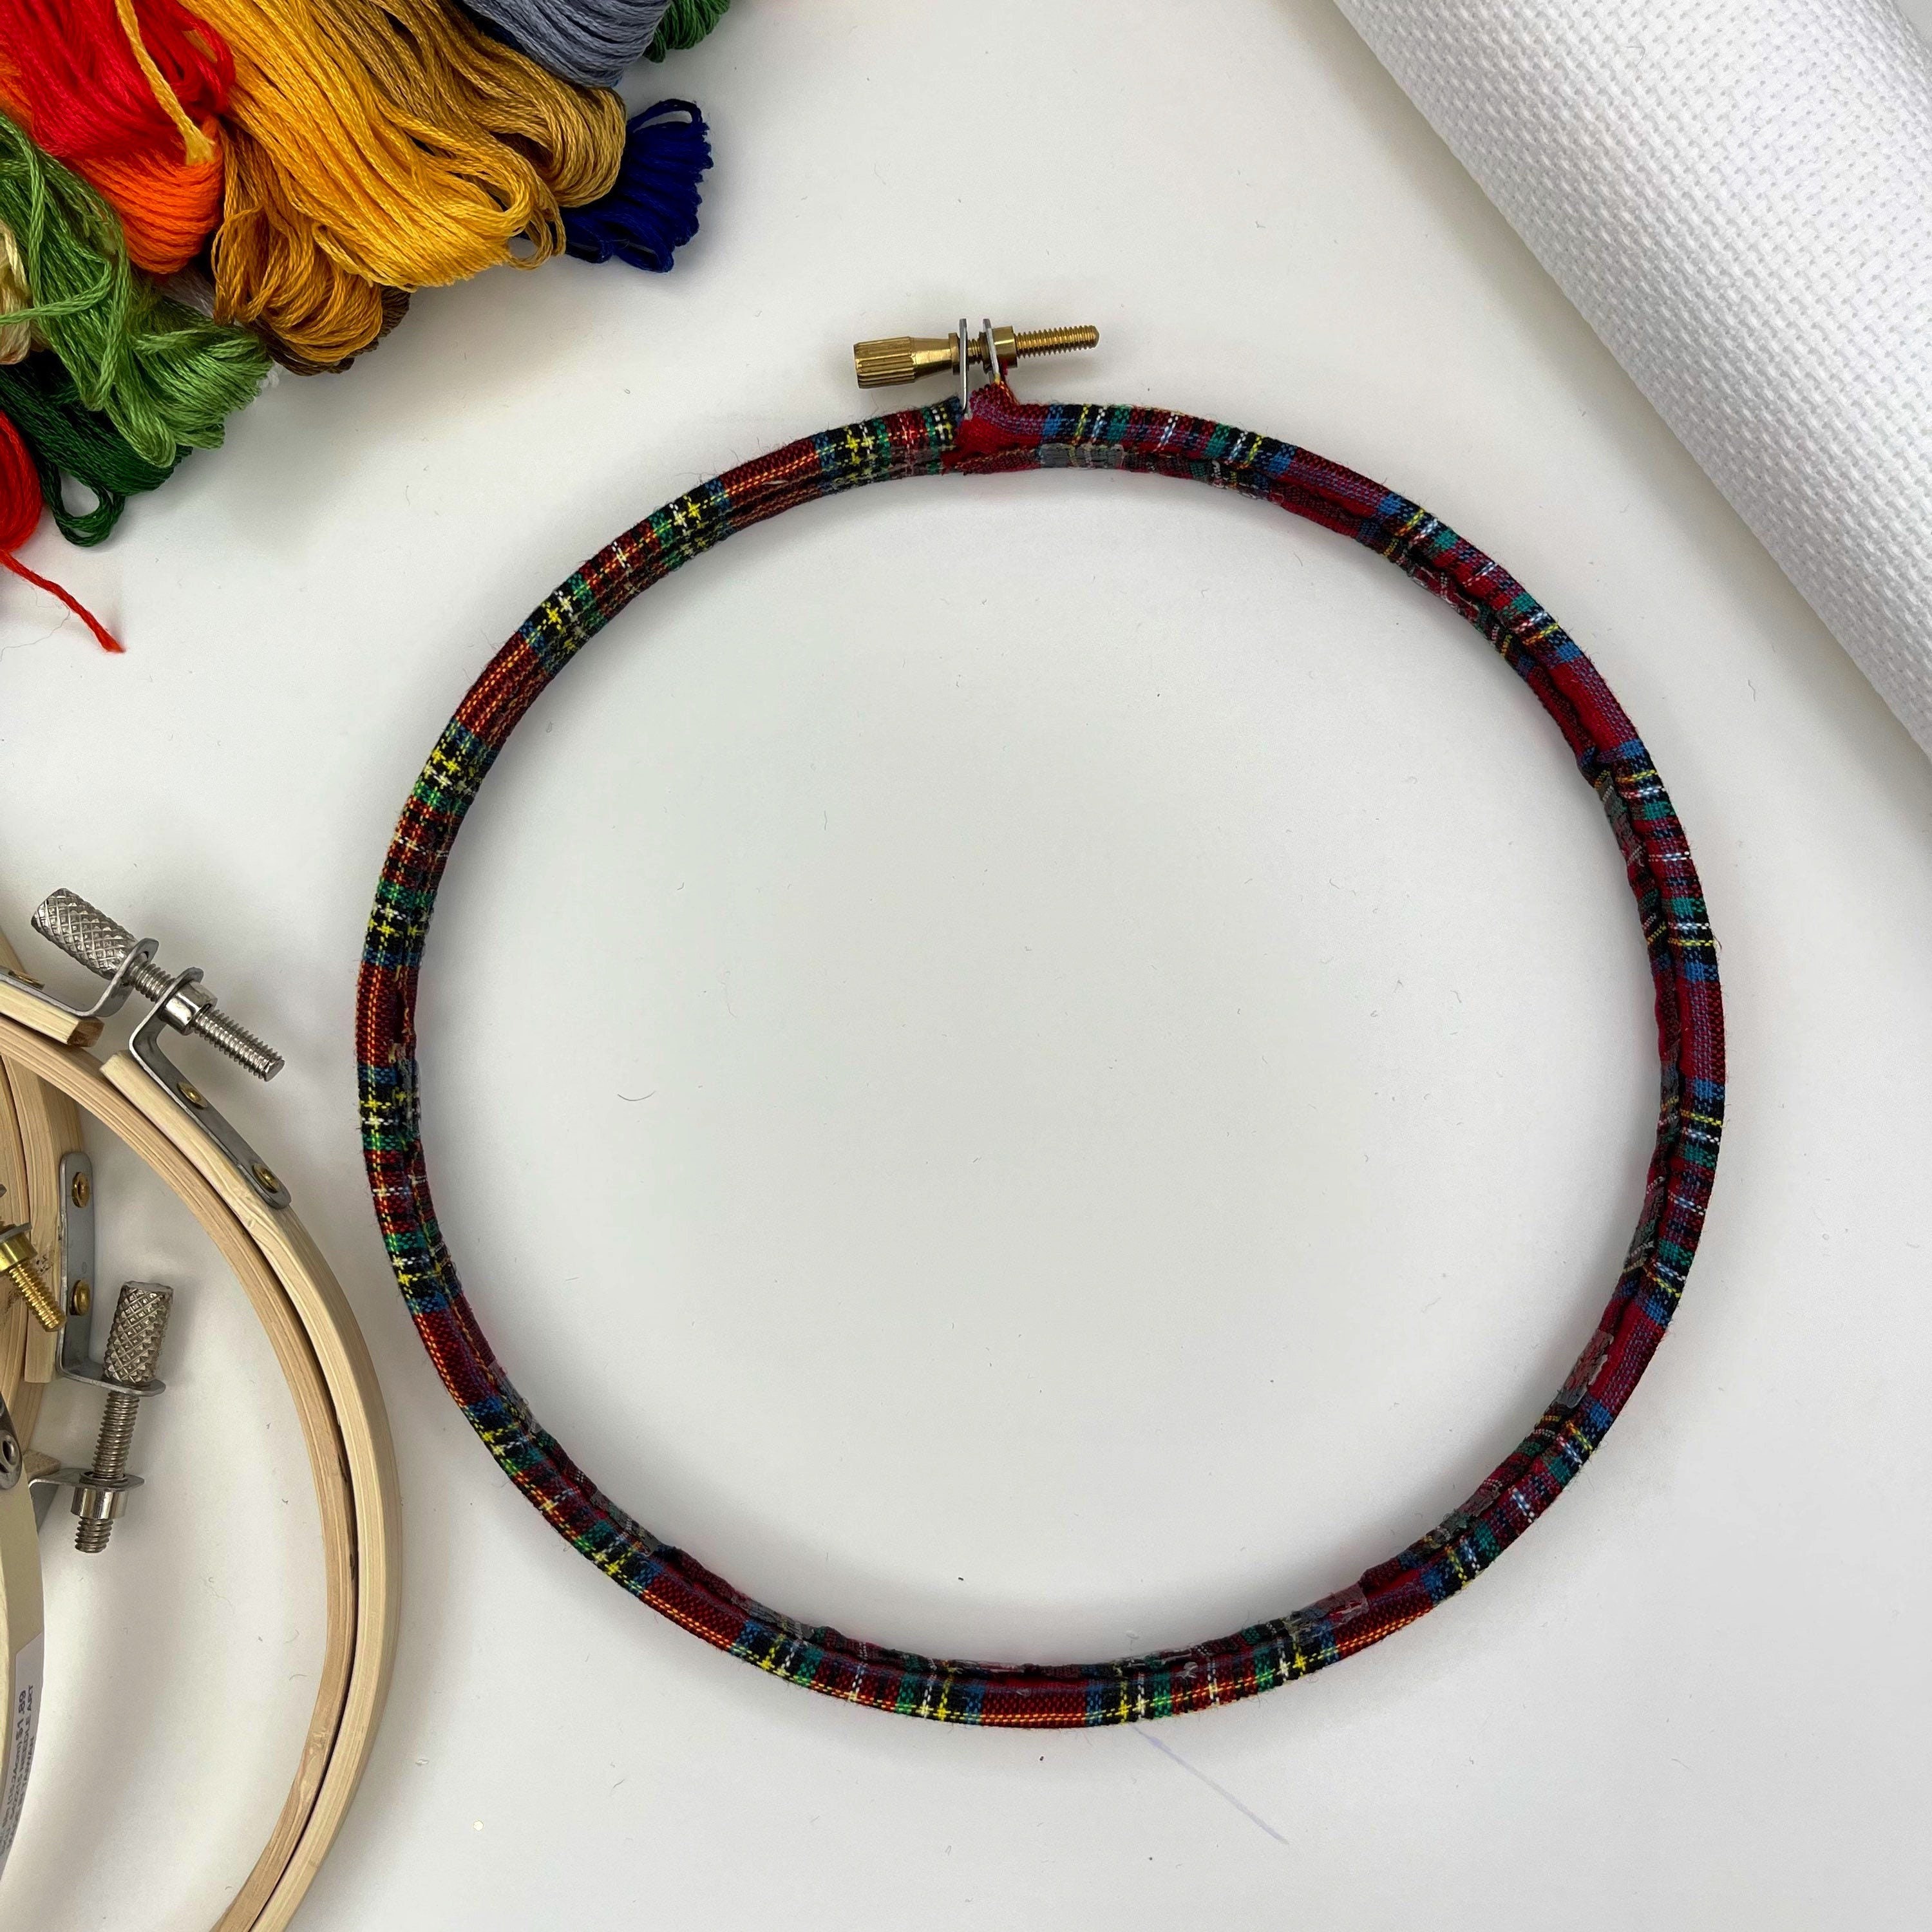 Buy Decorative Wrapped Embroidery Hoops. Christmas Holiday Frames for  Embroidery Cross Stitch. Online in India 